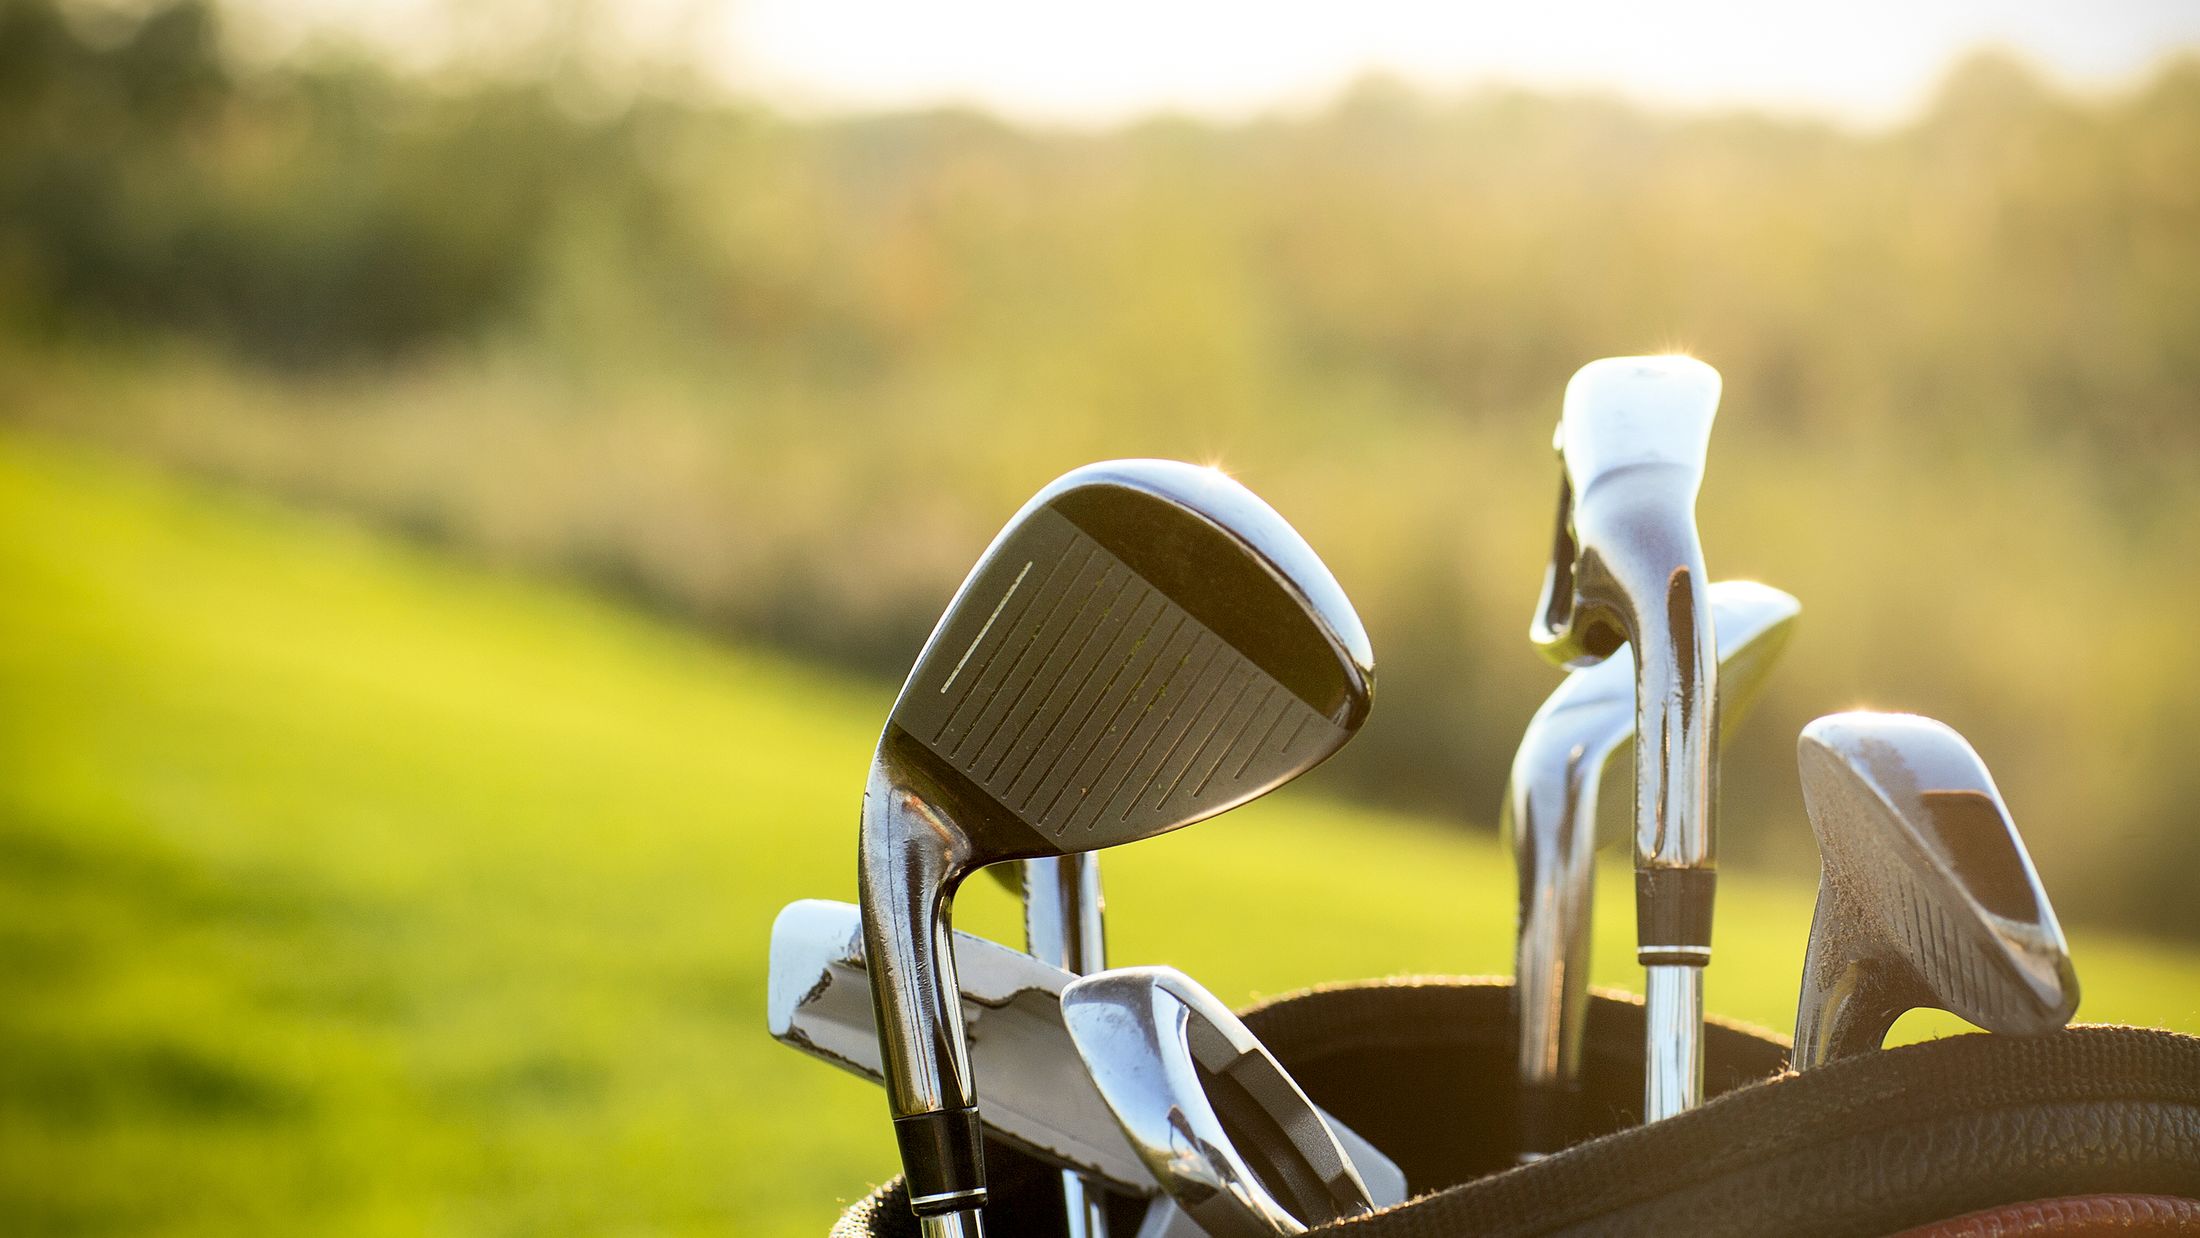 Golf clubs drivers over green field background. Summer sunset; Shutterstock ID 255601300; PO: Project Italy - Facilities images; Job: Project Italy - Facilities images; Client: H&J/Citalia